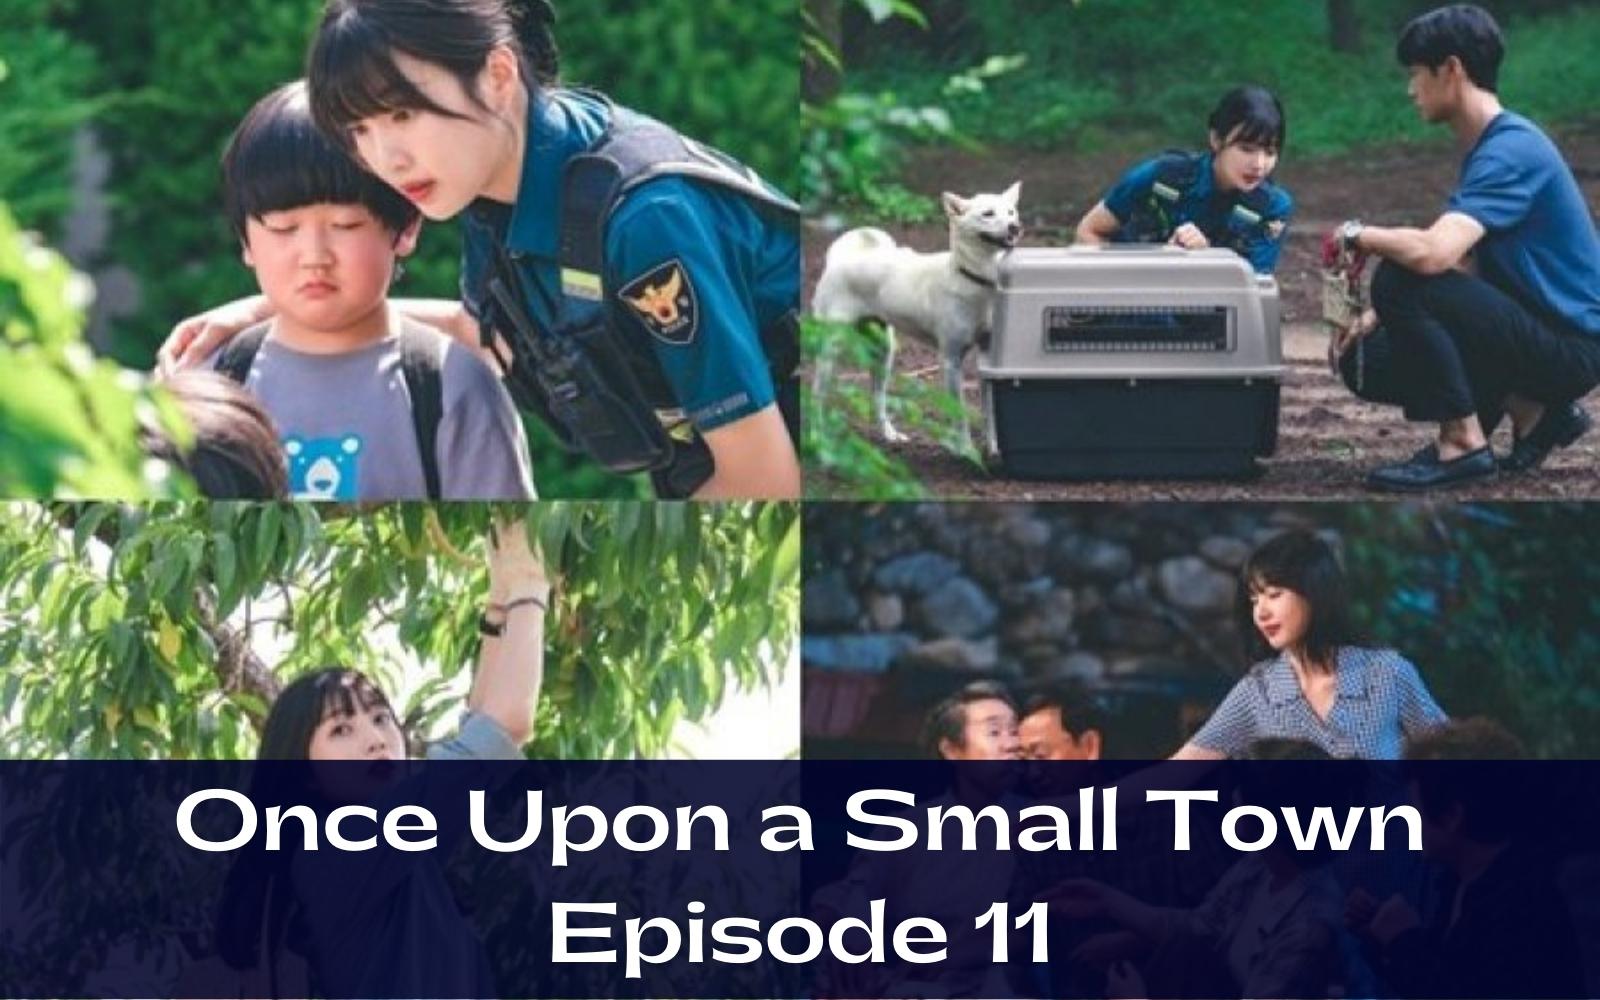 Once Upon a Small Town Episode 11 : Countdown, Release Date, Spoiler, Recap, Review & Where to Watch